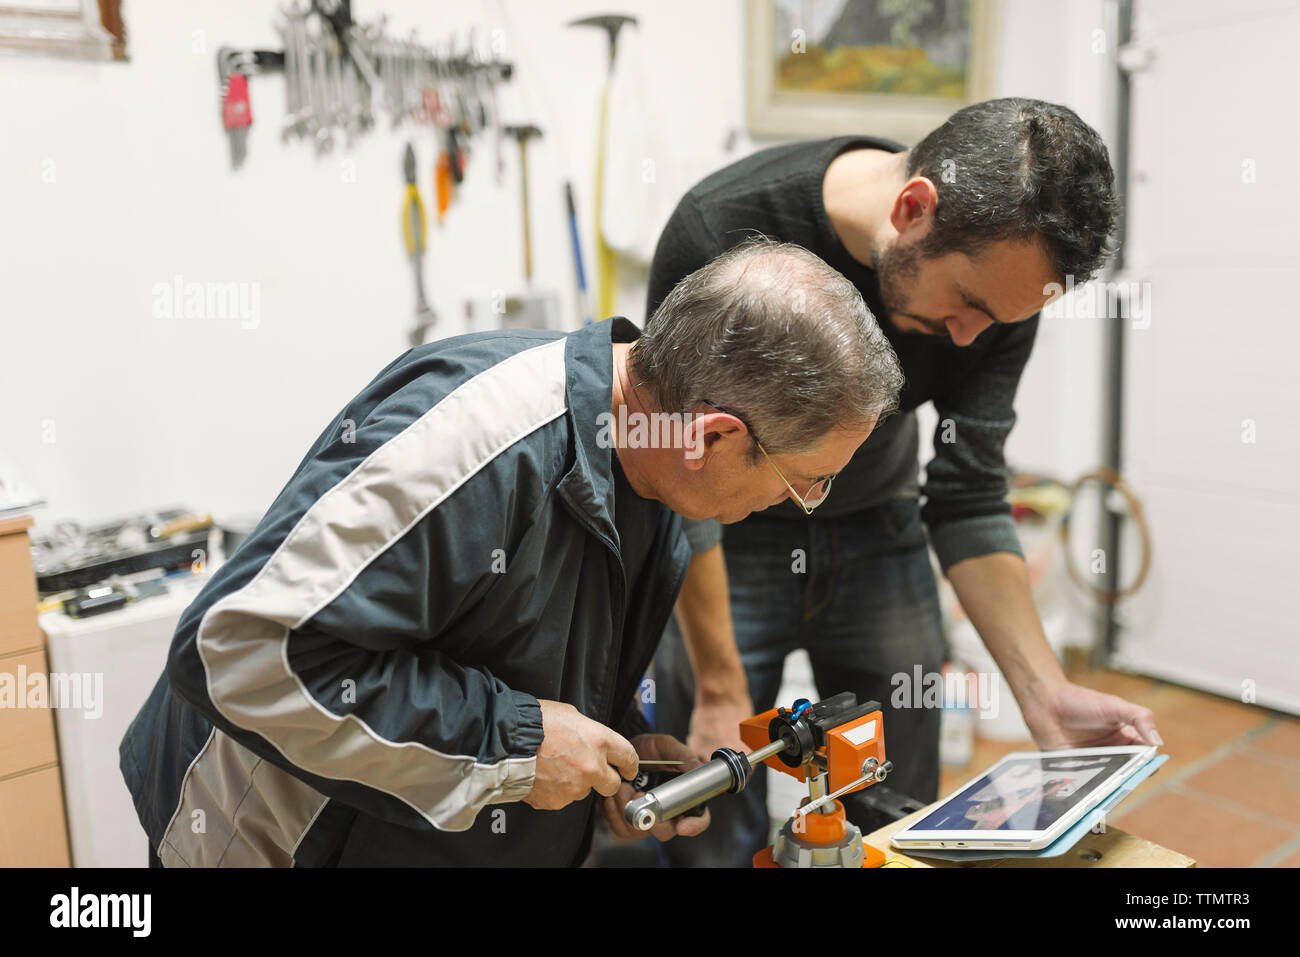 Mechanics watching tablet computer while operating equipment at workshop Stock Photo